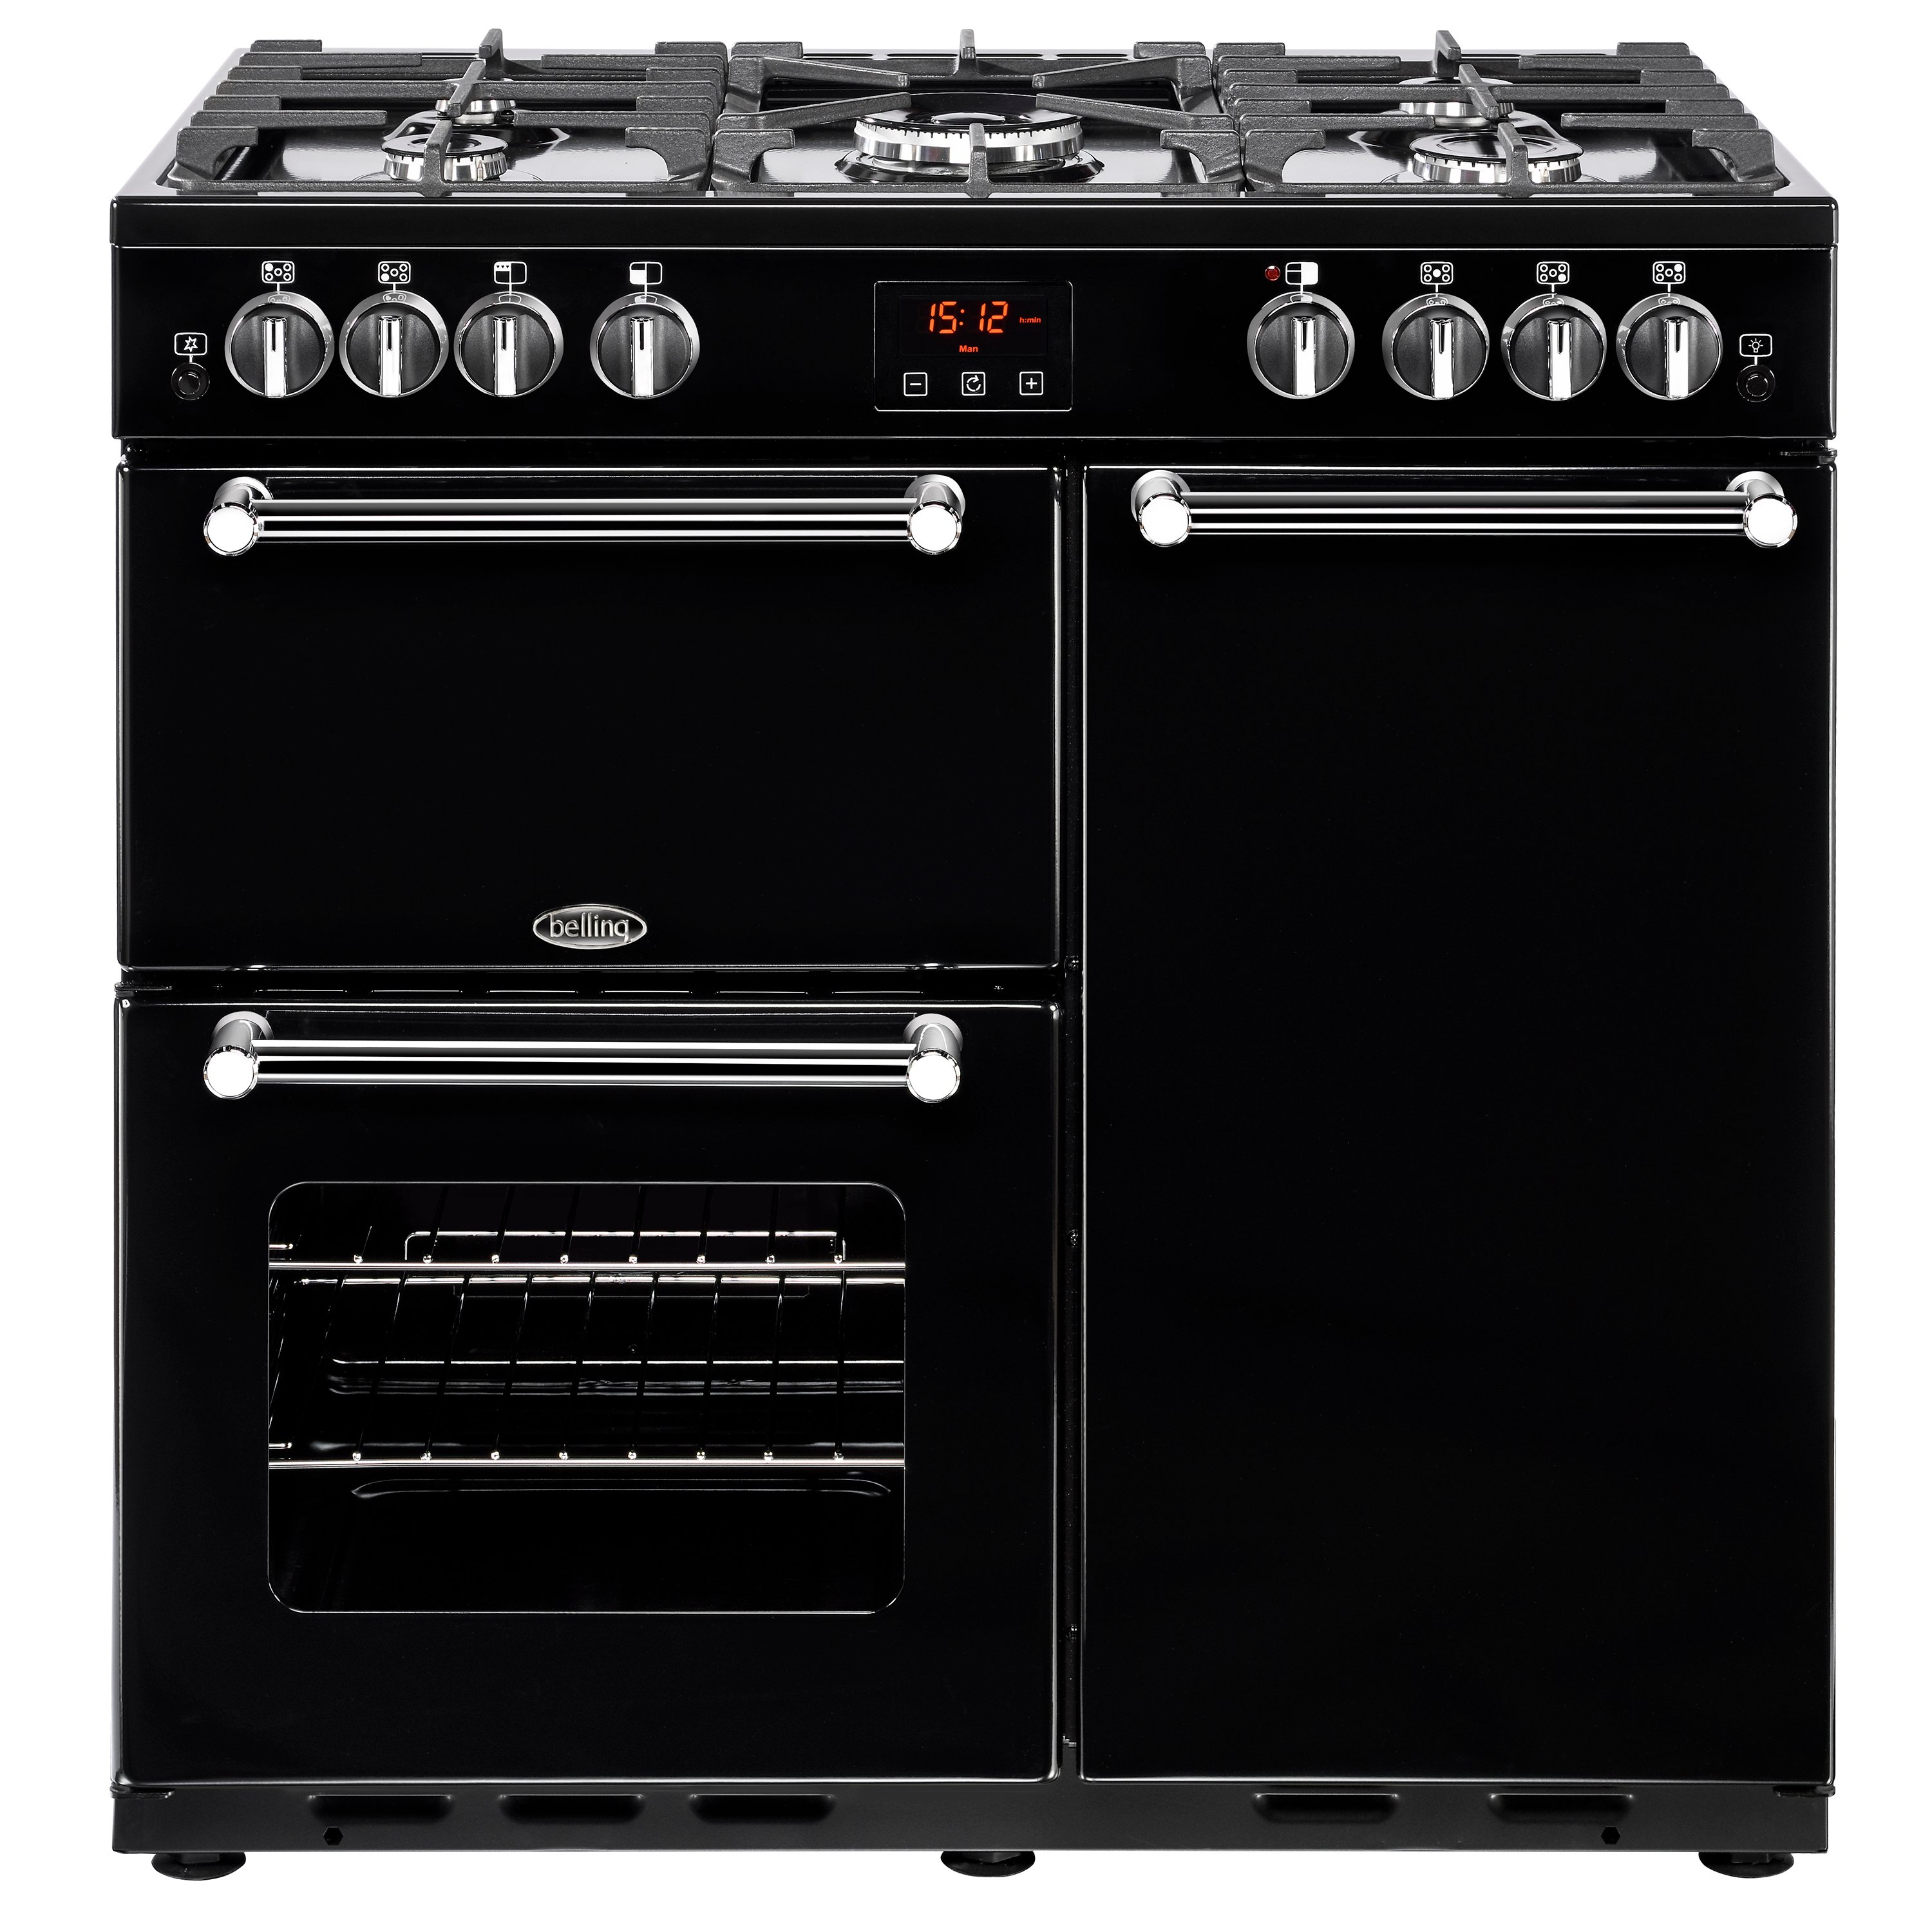 90cm gas range cooker with 5 burner gas hob, variable gas grill, conventional gas main oven and tall fanned electric oven.